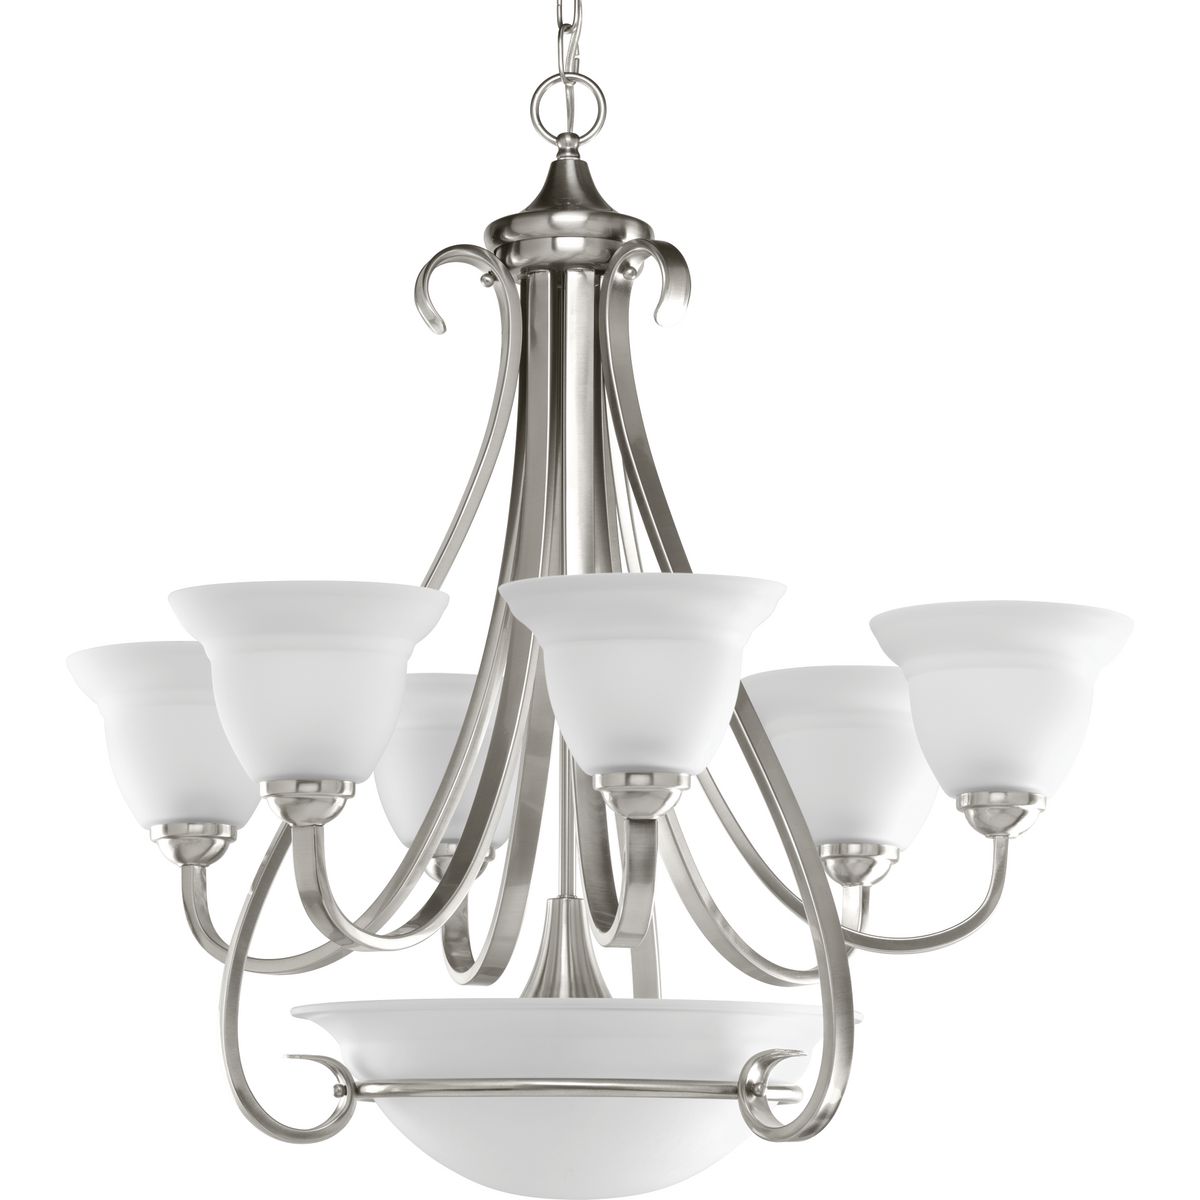 Torino Collection Six-Light Brushed Nickel Etched Glass